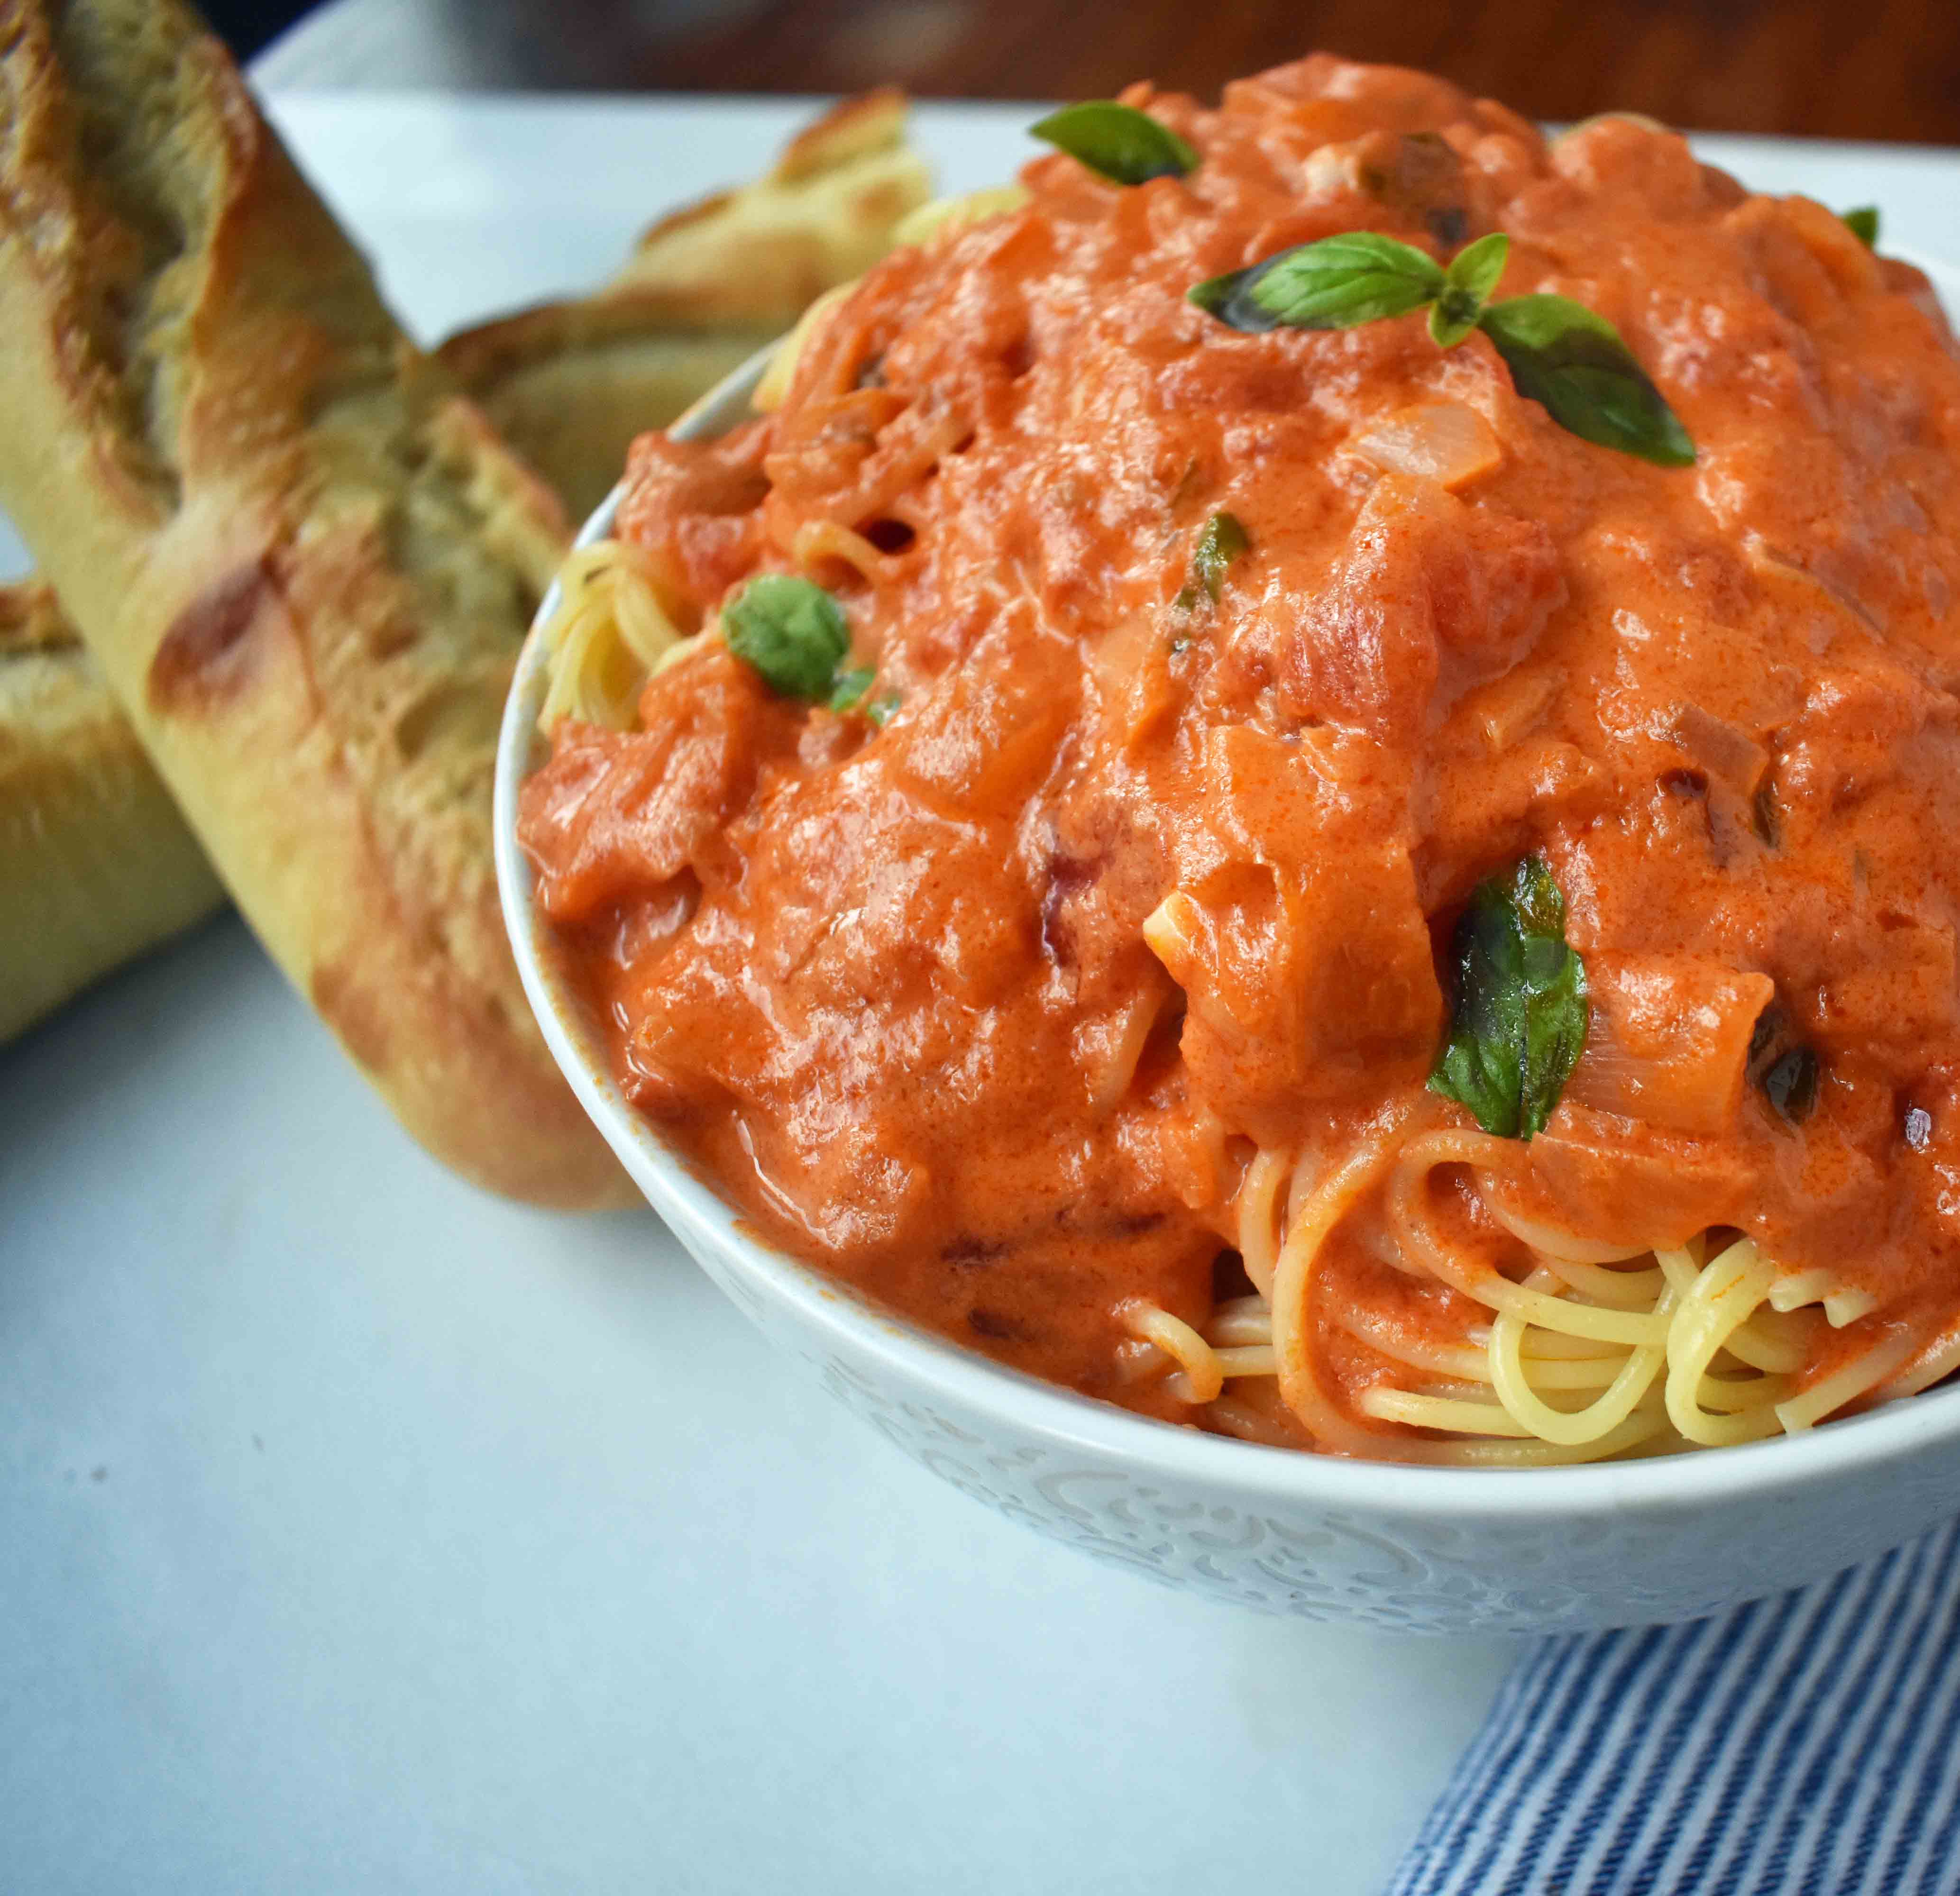 Lover's Pasta with Tomato Cream Sauce by Modern Honey